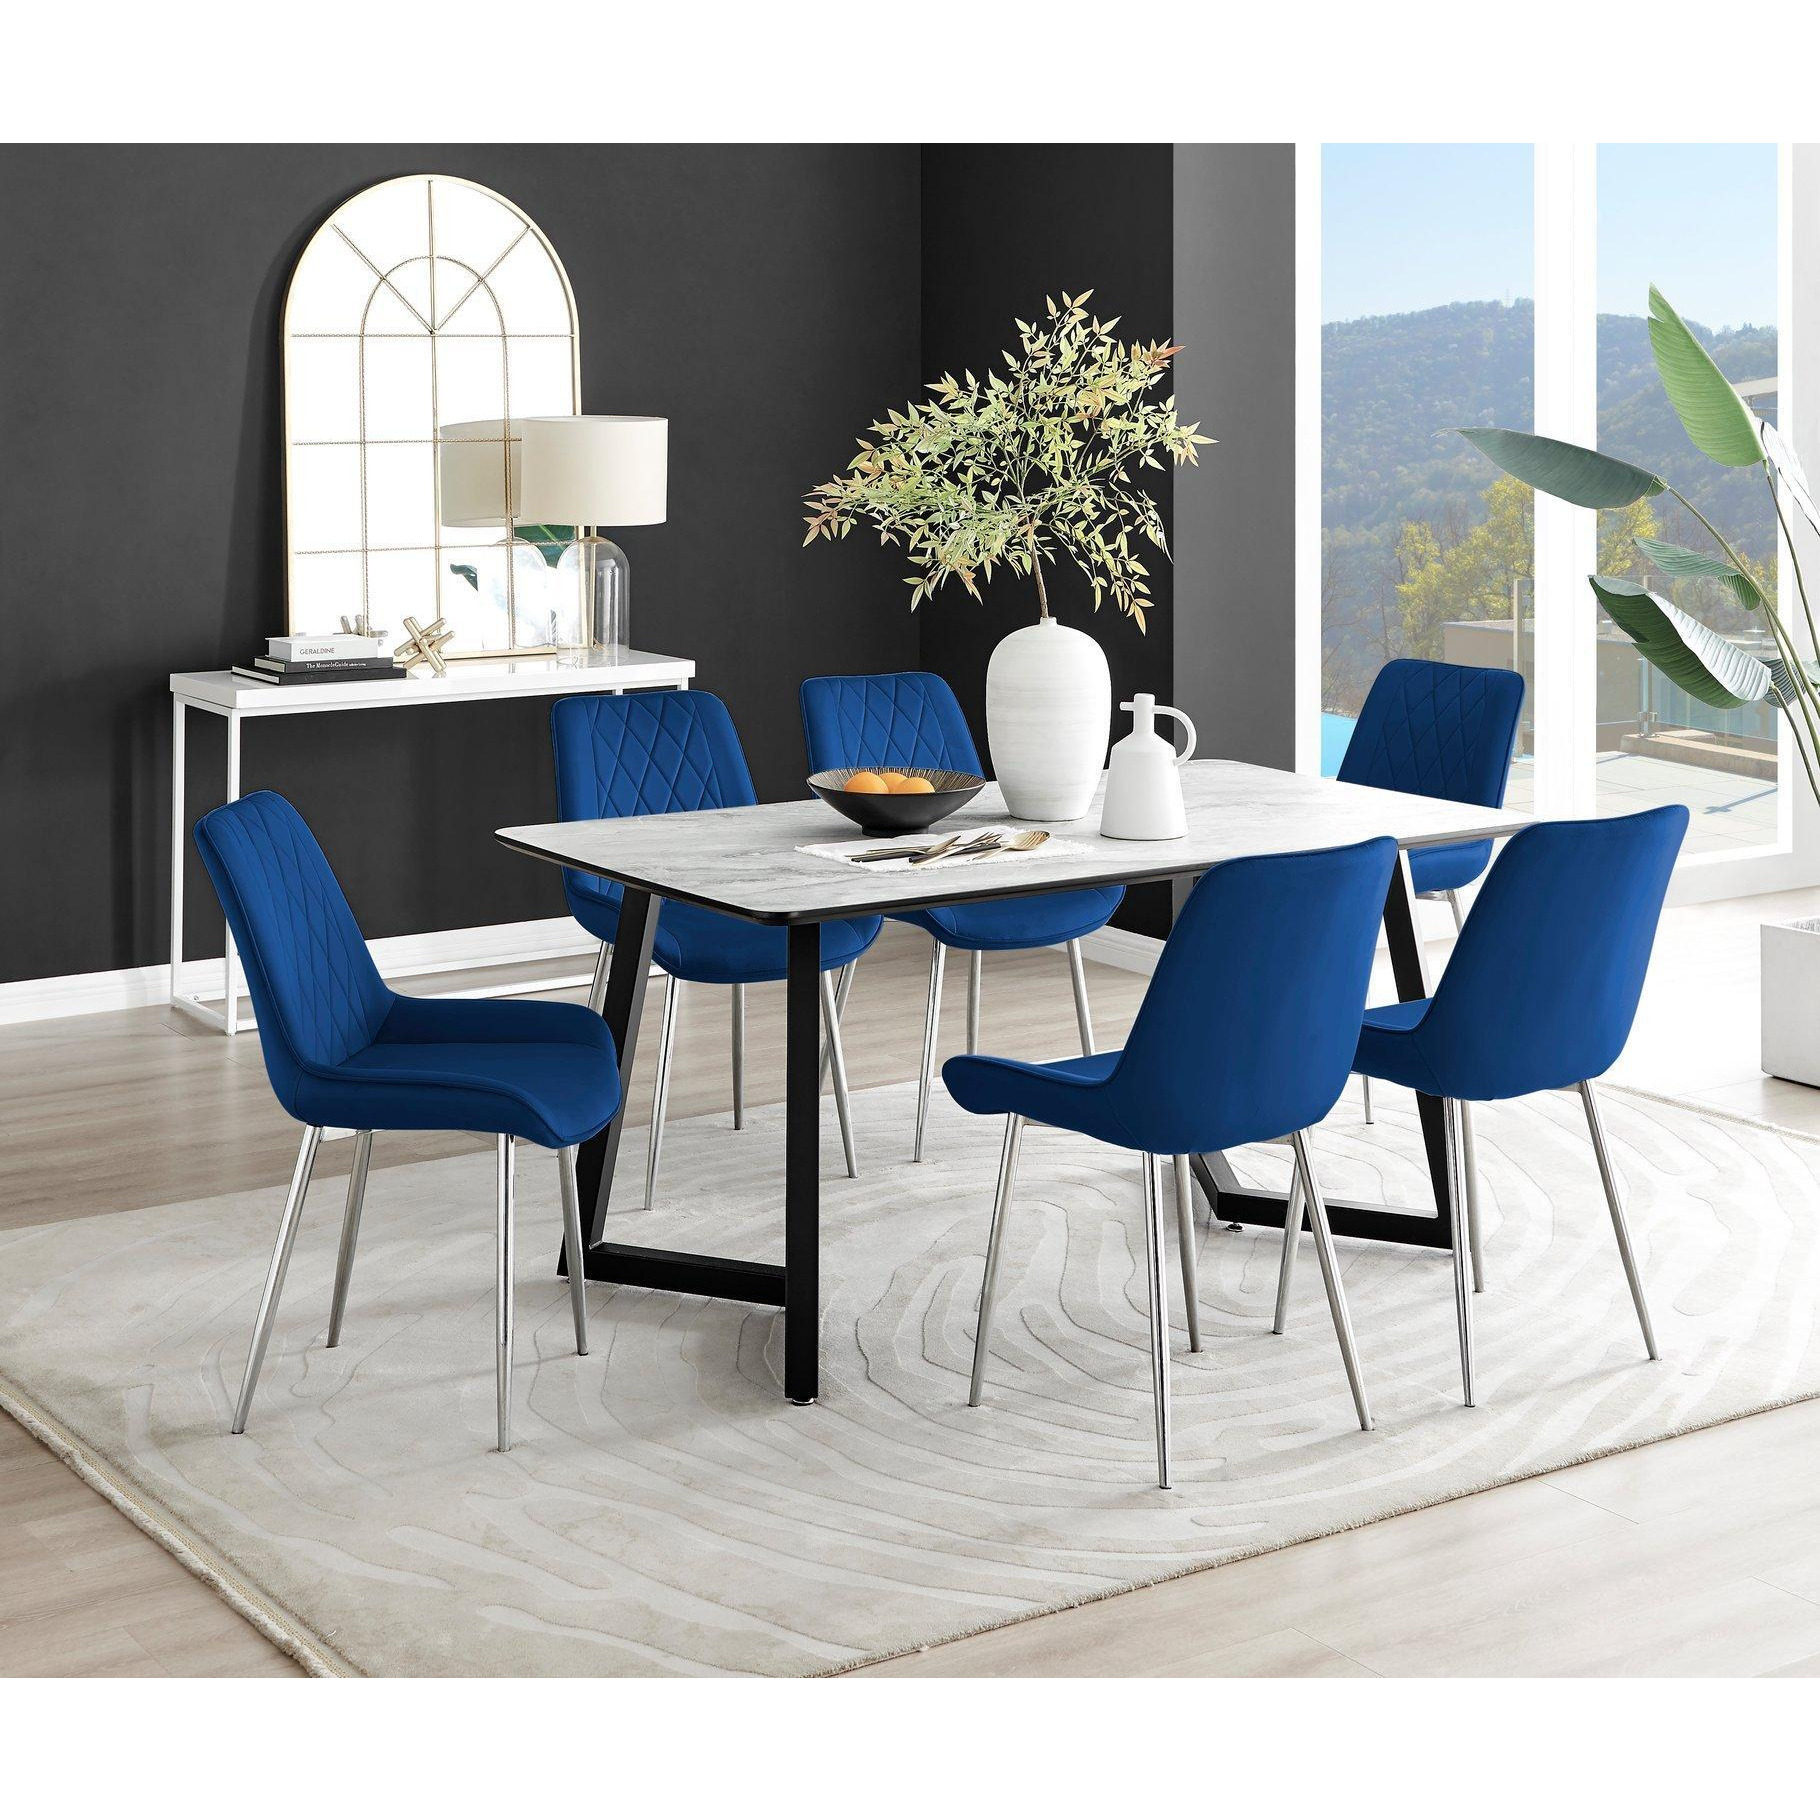 Carson White Marble Effect Dining Table & 6 Pesaro Silver Chairs - image 1